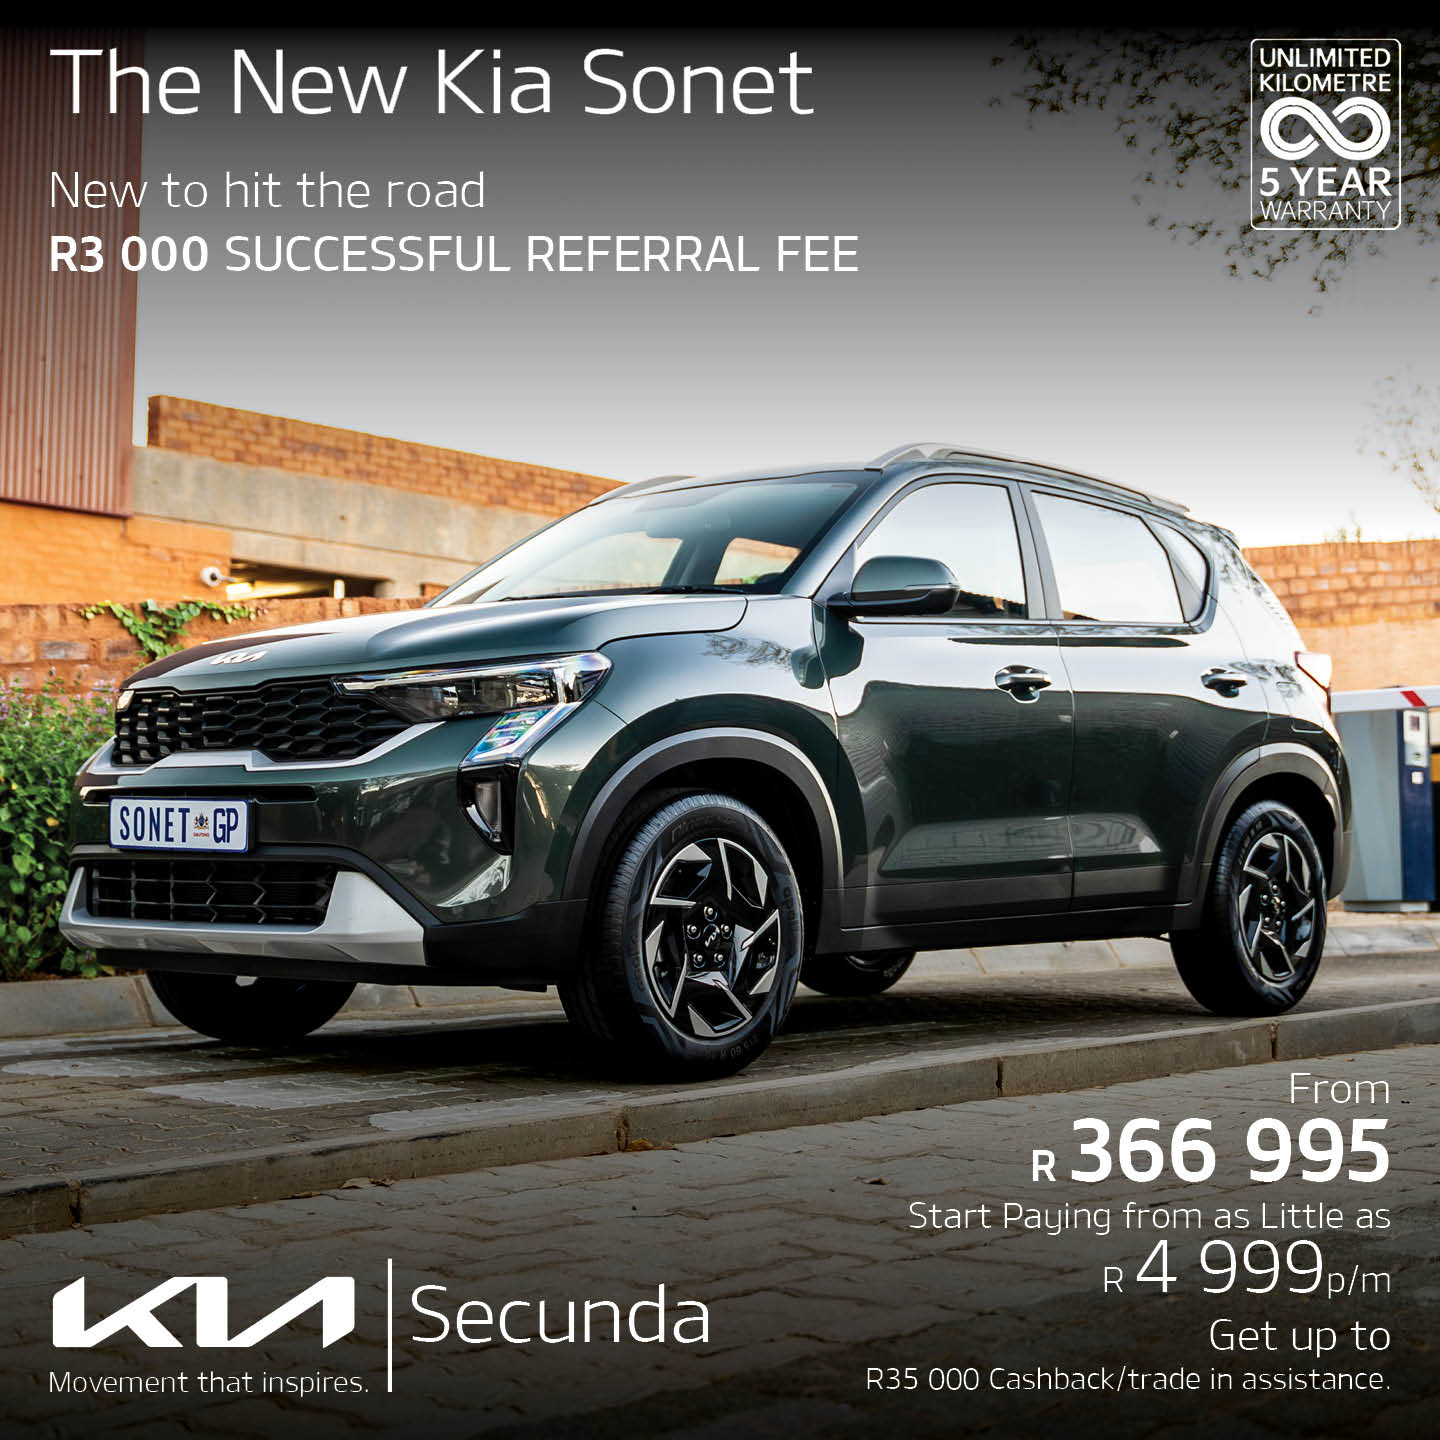 New to hit the road – The New KIA Sonet image from Eastvaal Motors